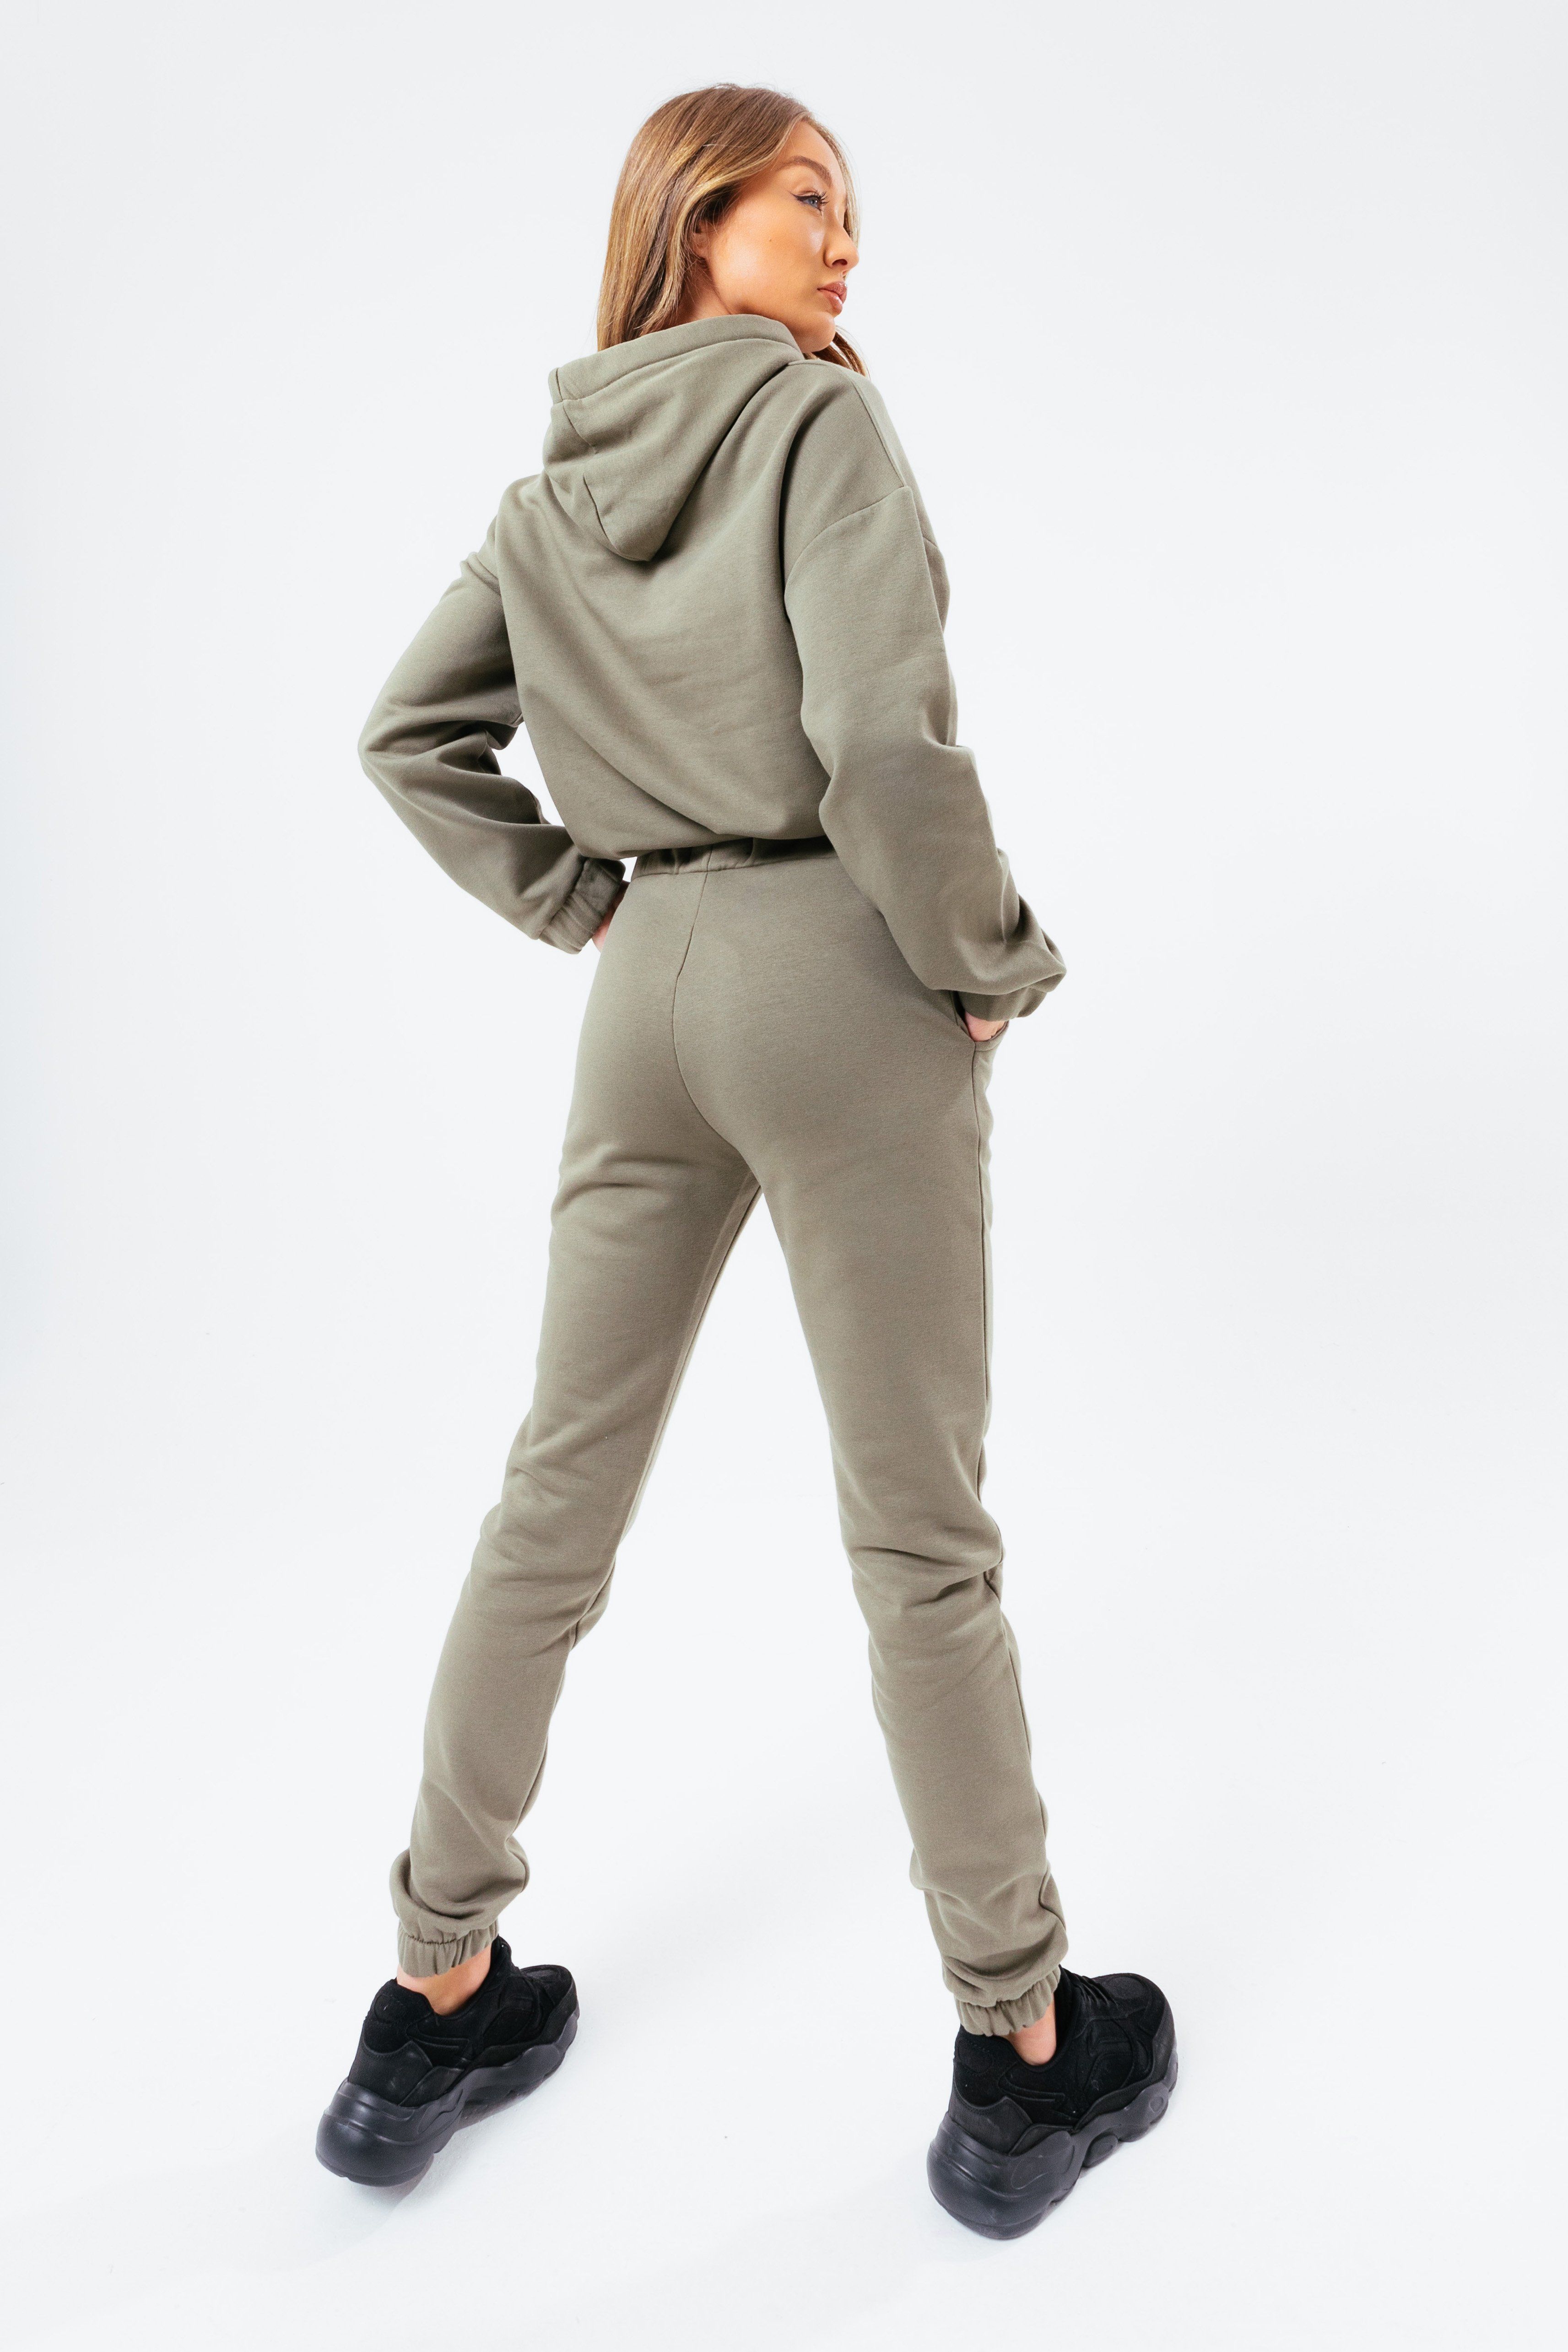 Introducing the HYPE. Khaki Women's Joggers designed in our all-over mint colour palette. Designed in our women's oversized baggy shape, in 80% cotton and 20% polyester fabric for the ultimate comfort. With an elasticated waistband, fitted cuffs and embossed drawstring pullers. Wear with the matching hoodie for your next loungewear look. Machine washable.